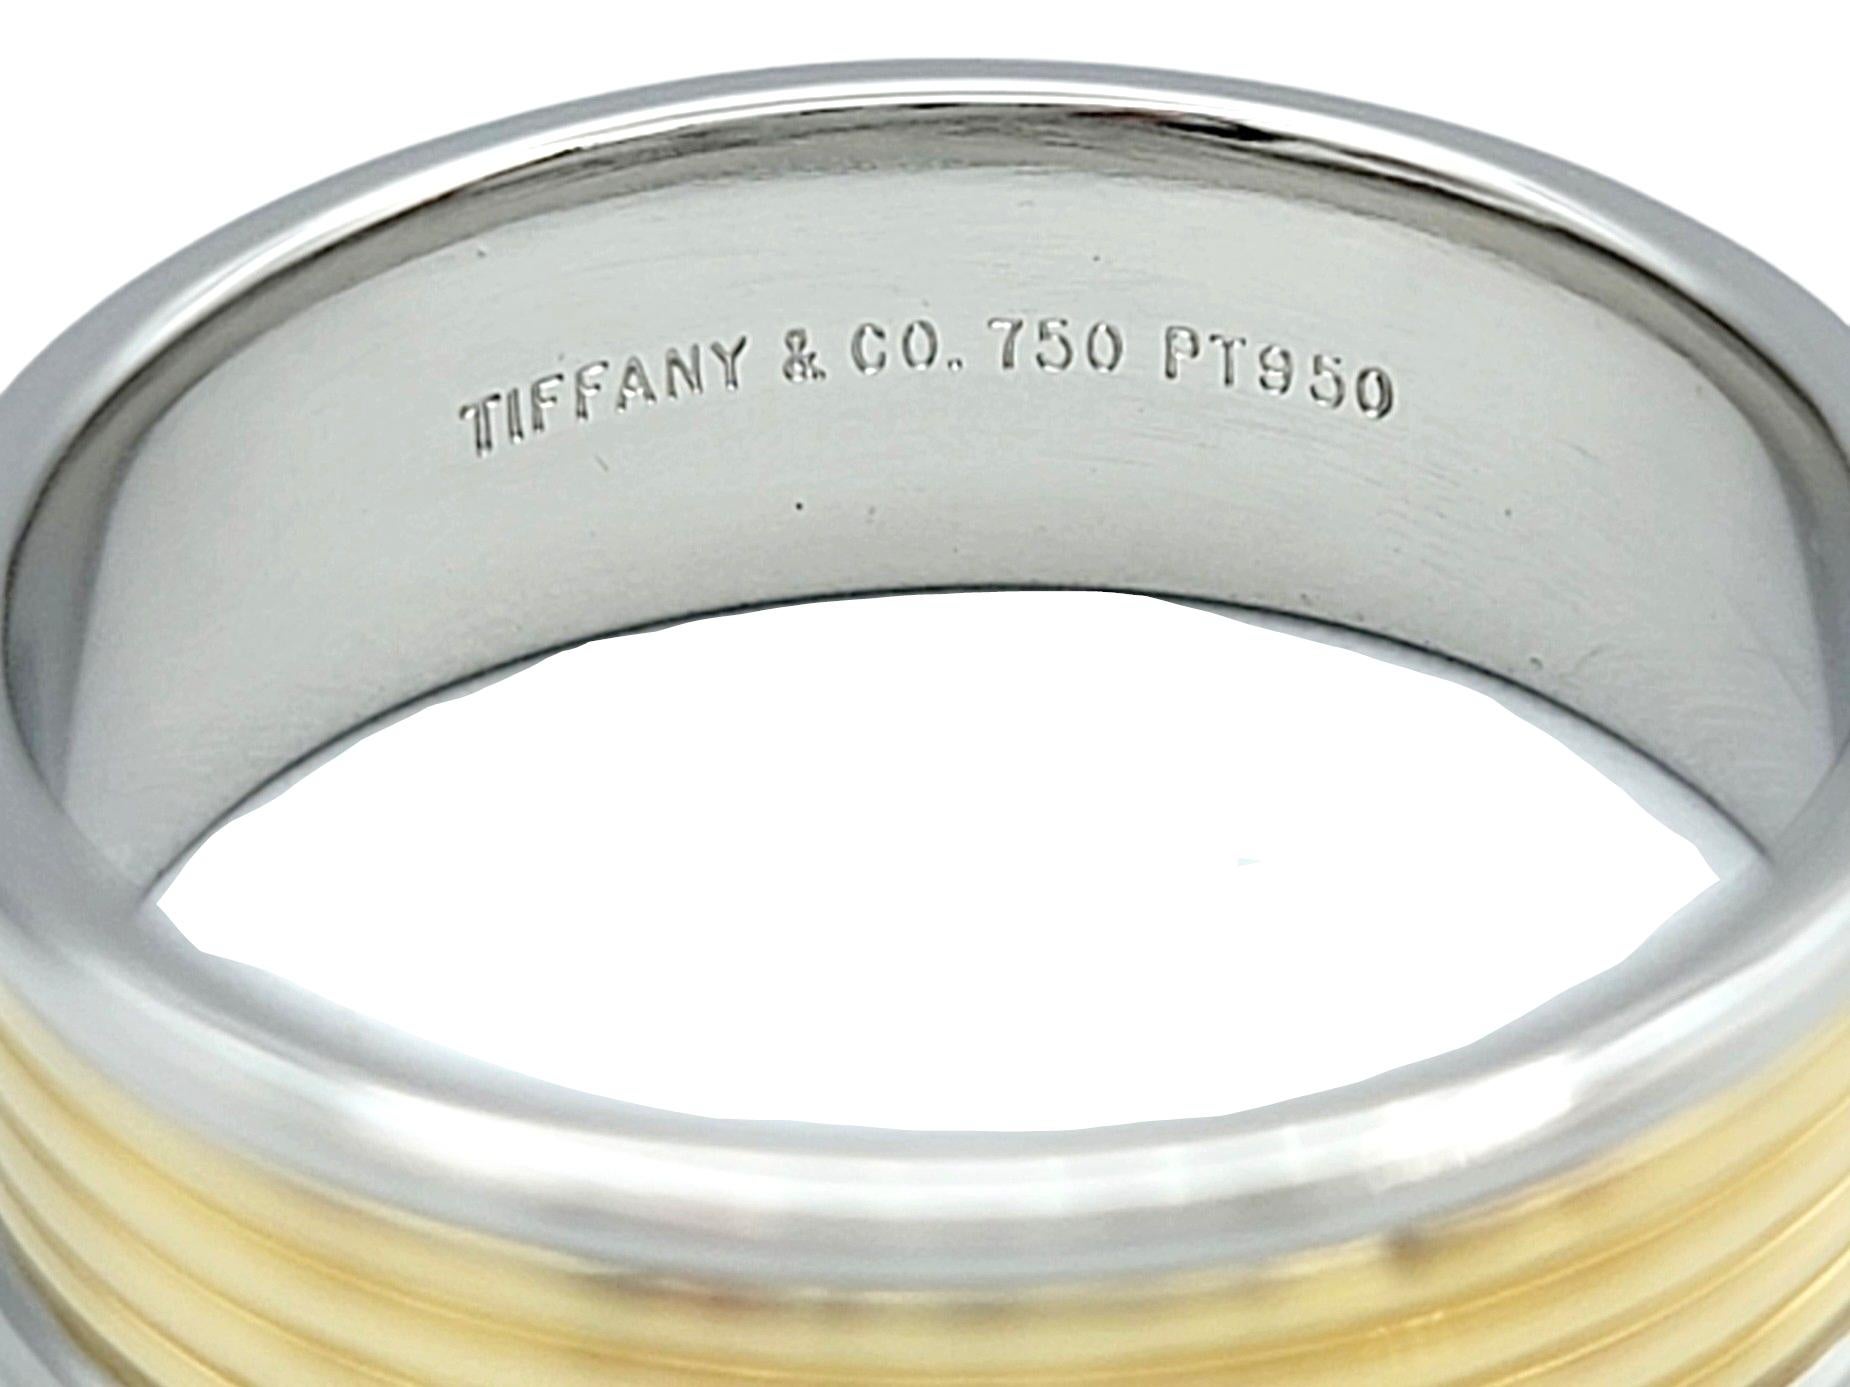 Contemporary Tiffany & Co. Two Tone Ribbed Band Ring in Platinum and 18 Karat Yellow Gold